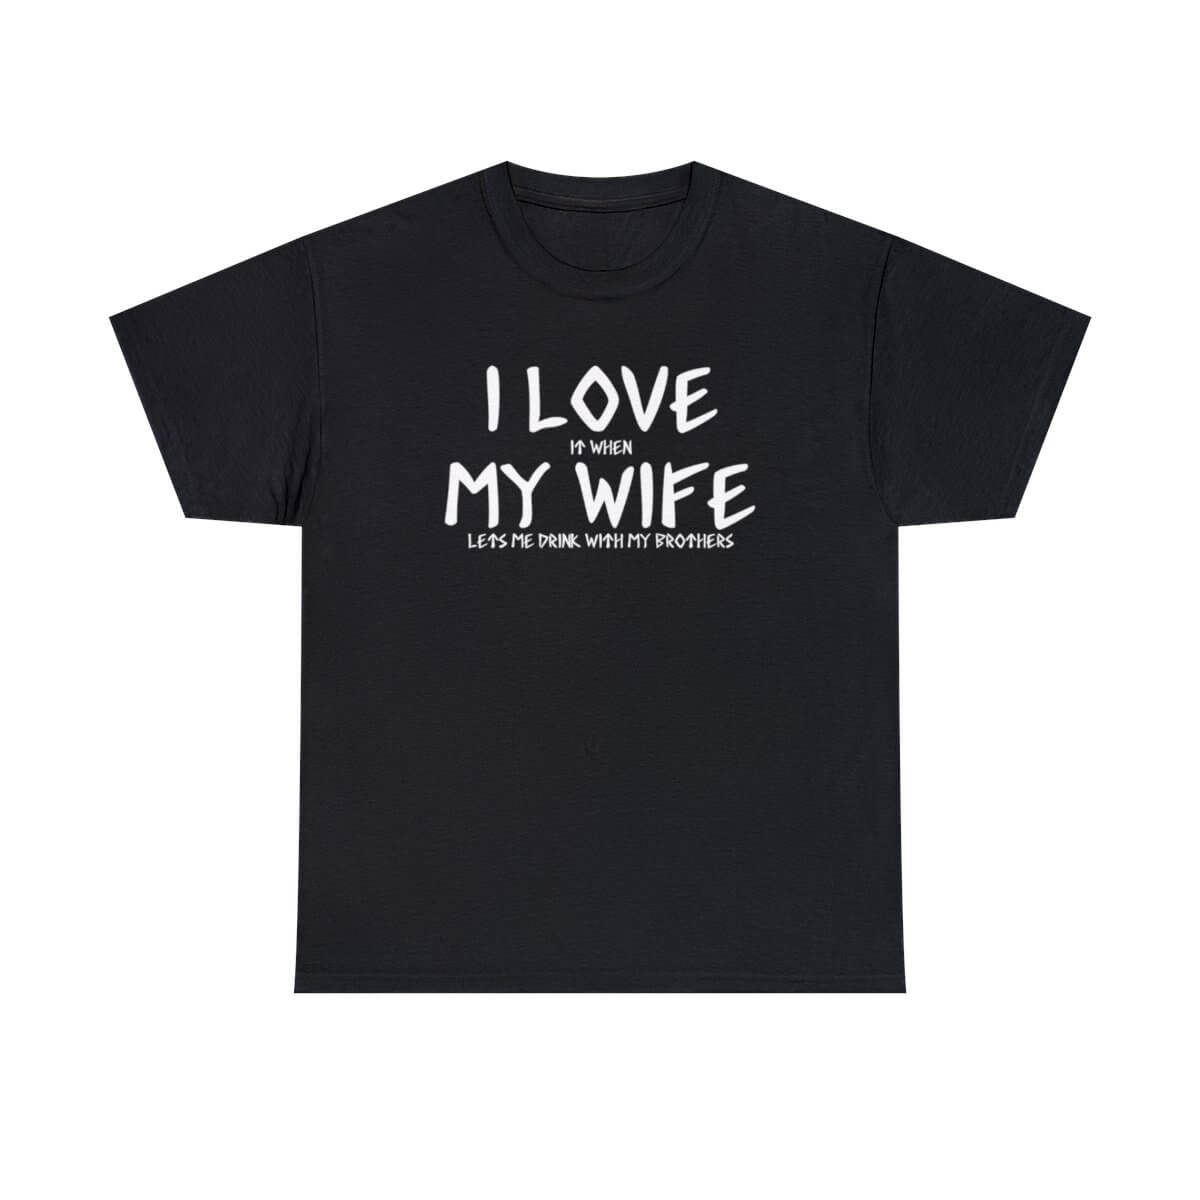 I LOVE it when MY WIFE Viking T-Shirt, Funny Husband/Dad Tee, S-5XL